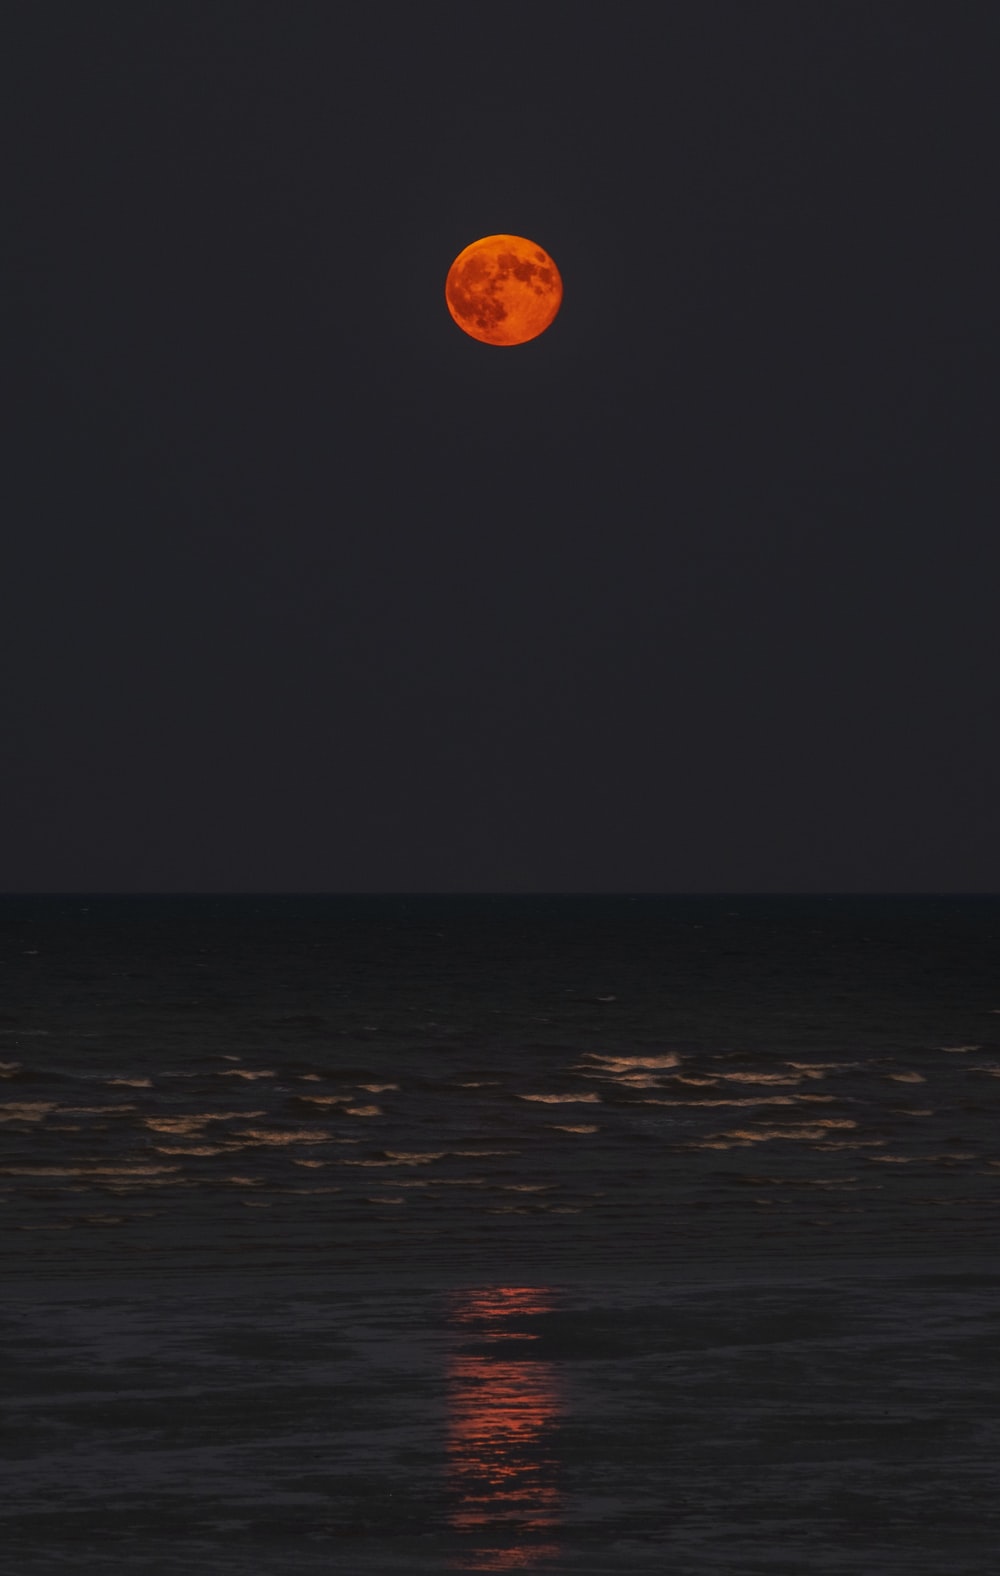 Full Moon Ocean Picture. Download Free Image